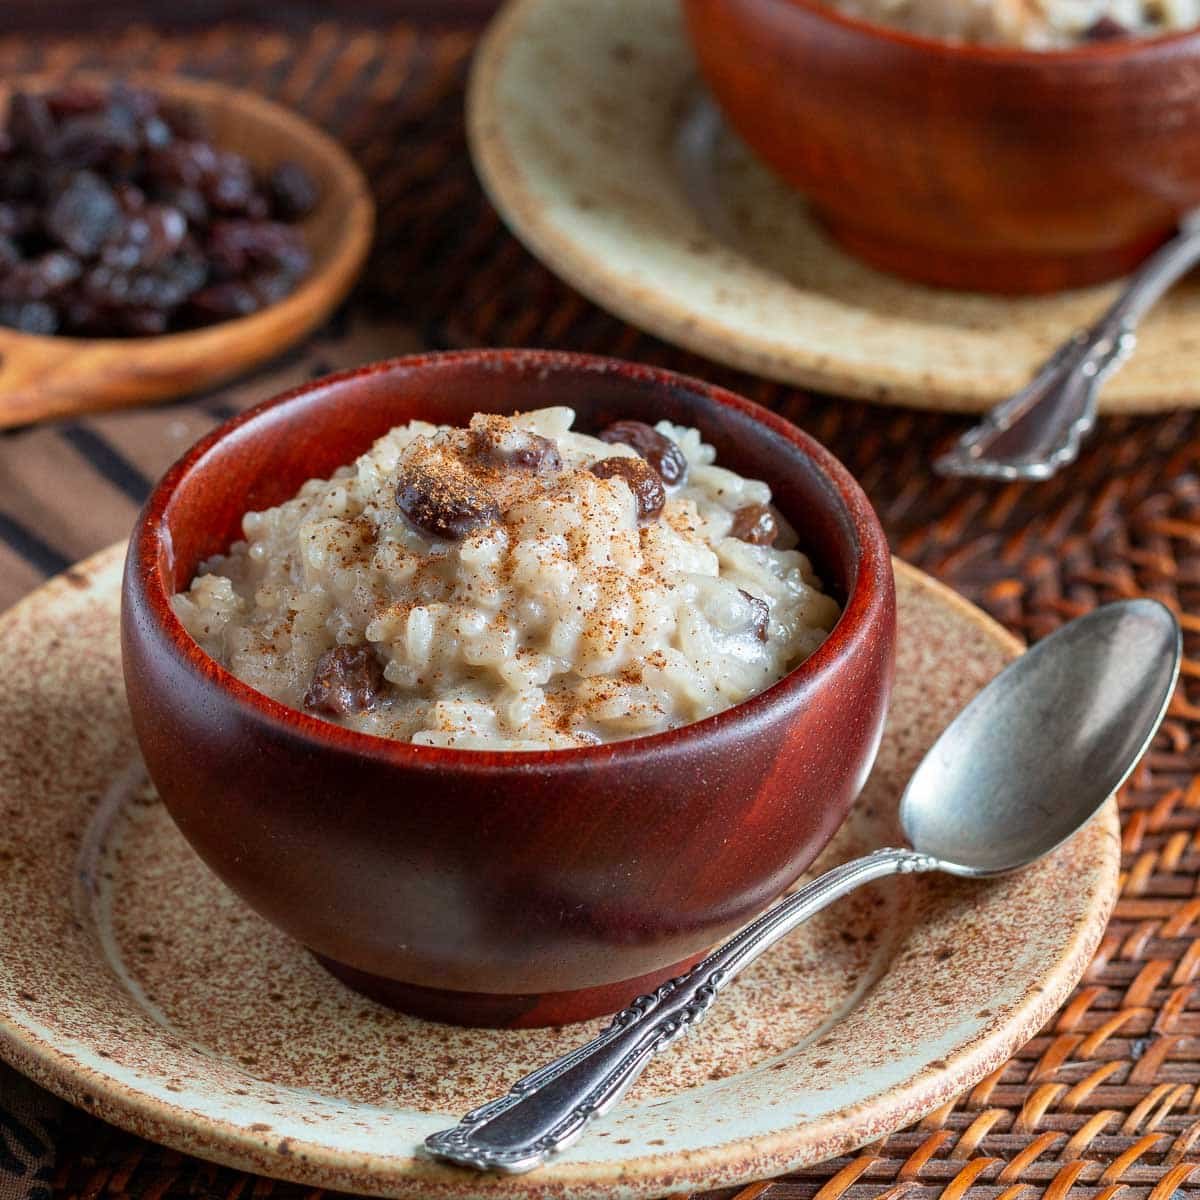 Coconut rice pudding made with condensed milk in a wooden bowl with a sprinkle of cinnamon and raisins.